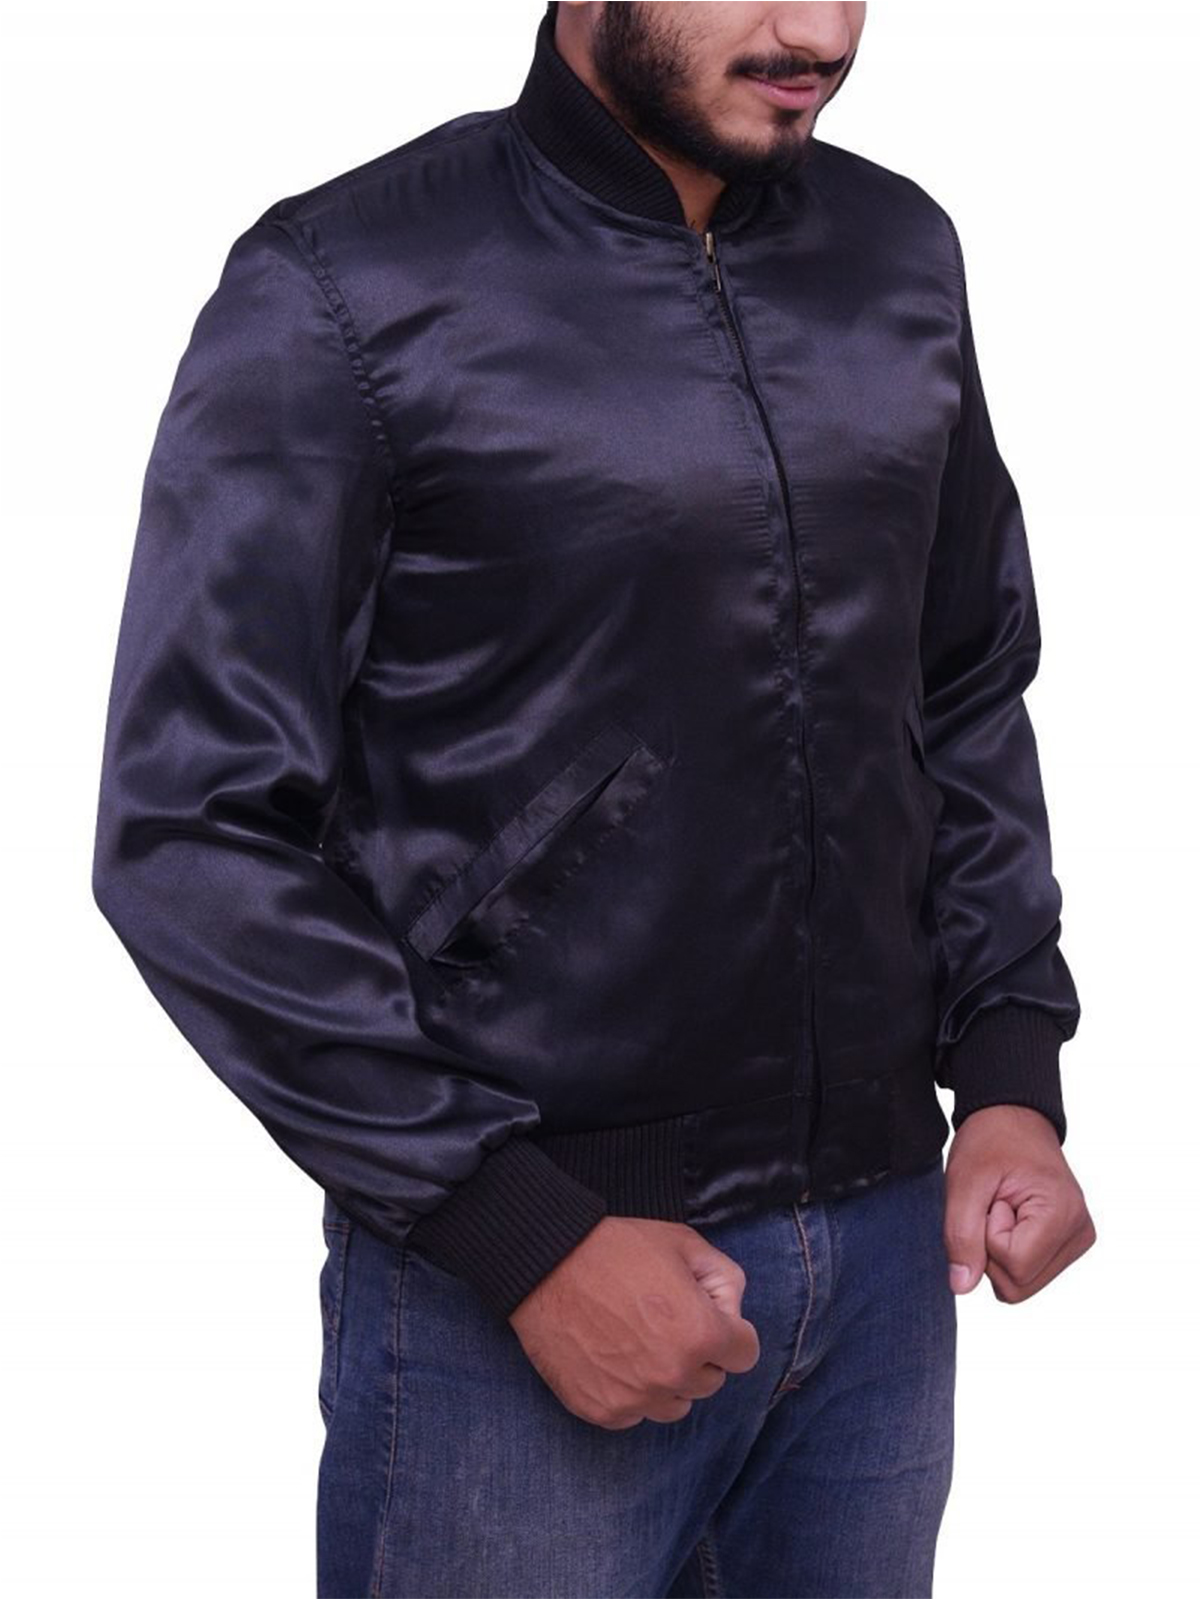 Rocky 2 Sylvester Stallone Tiger Jacket – Bay Perfect